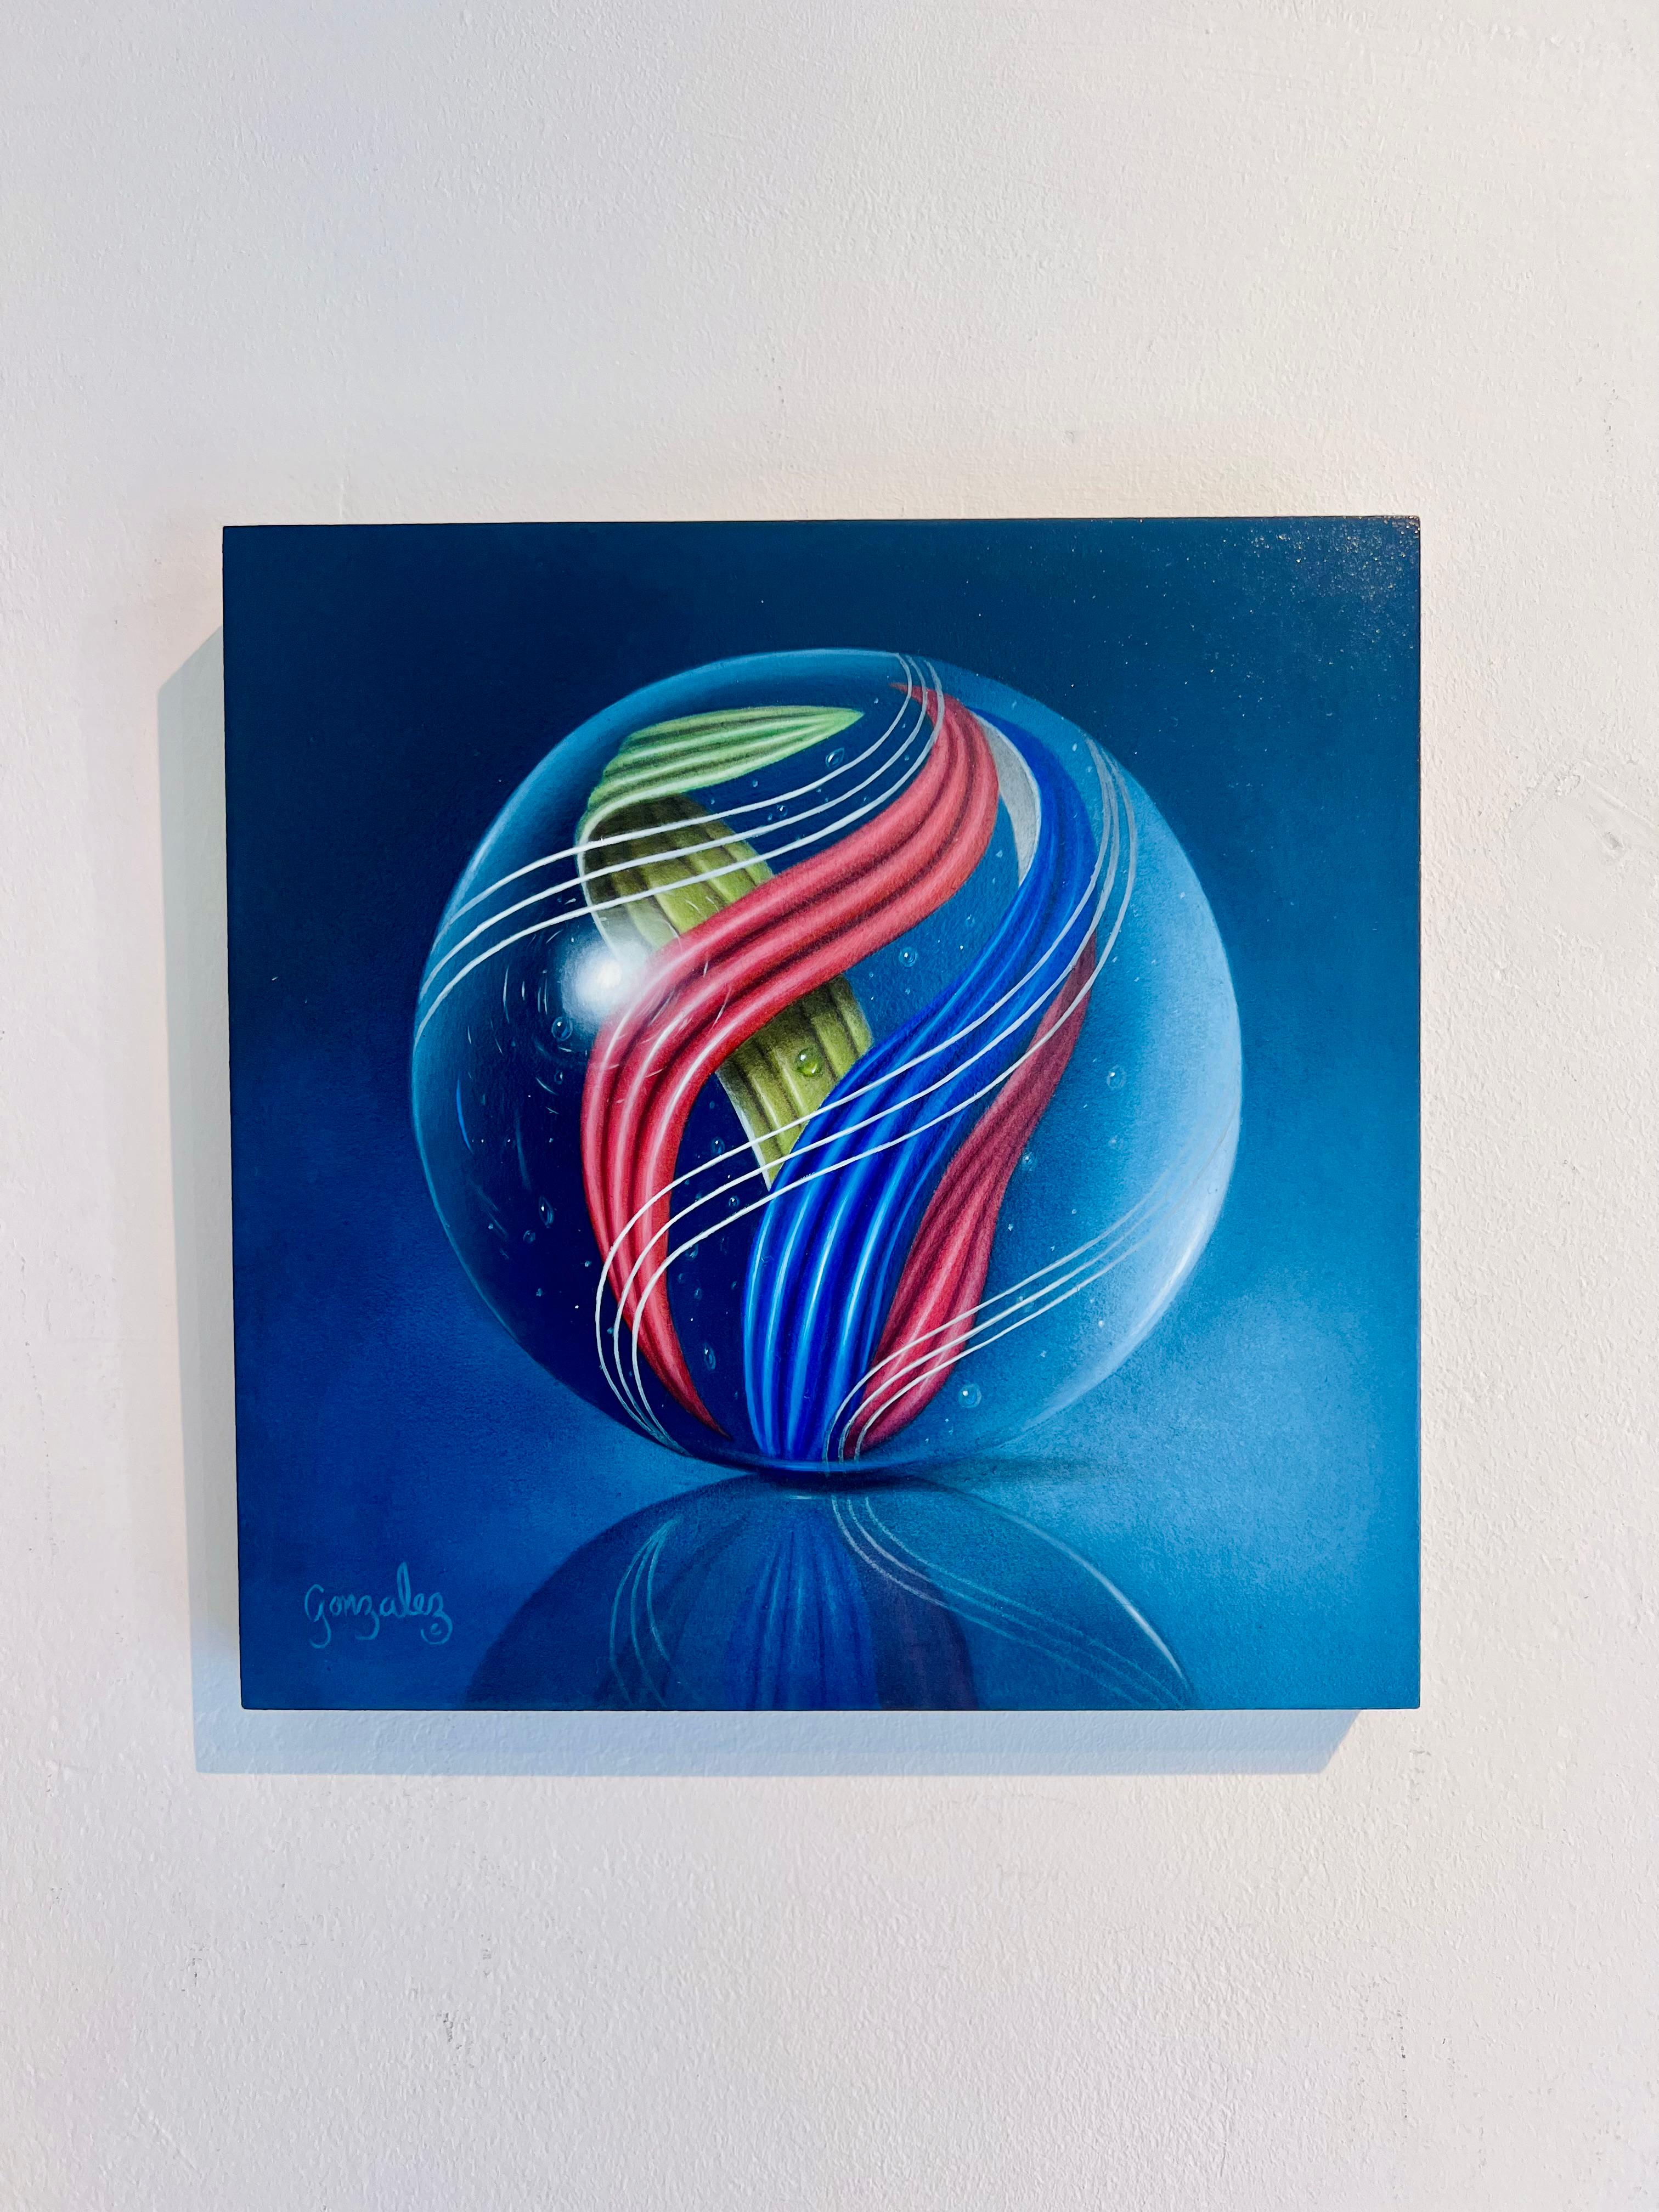 Spirals - original contemporary realist glass ball oil painting artwork - Painting by George A. Gonzalez